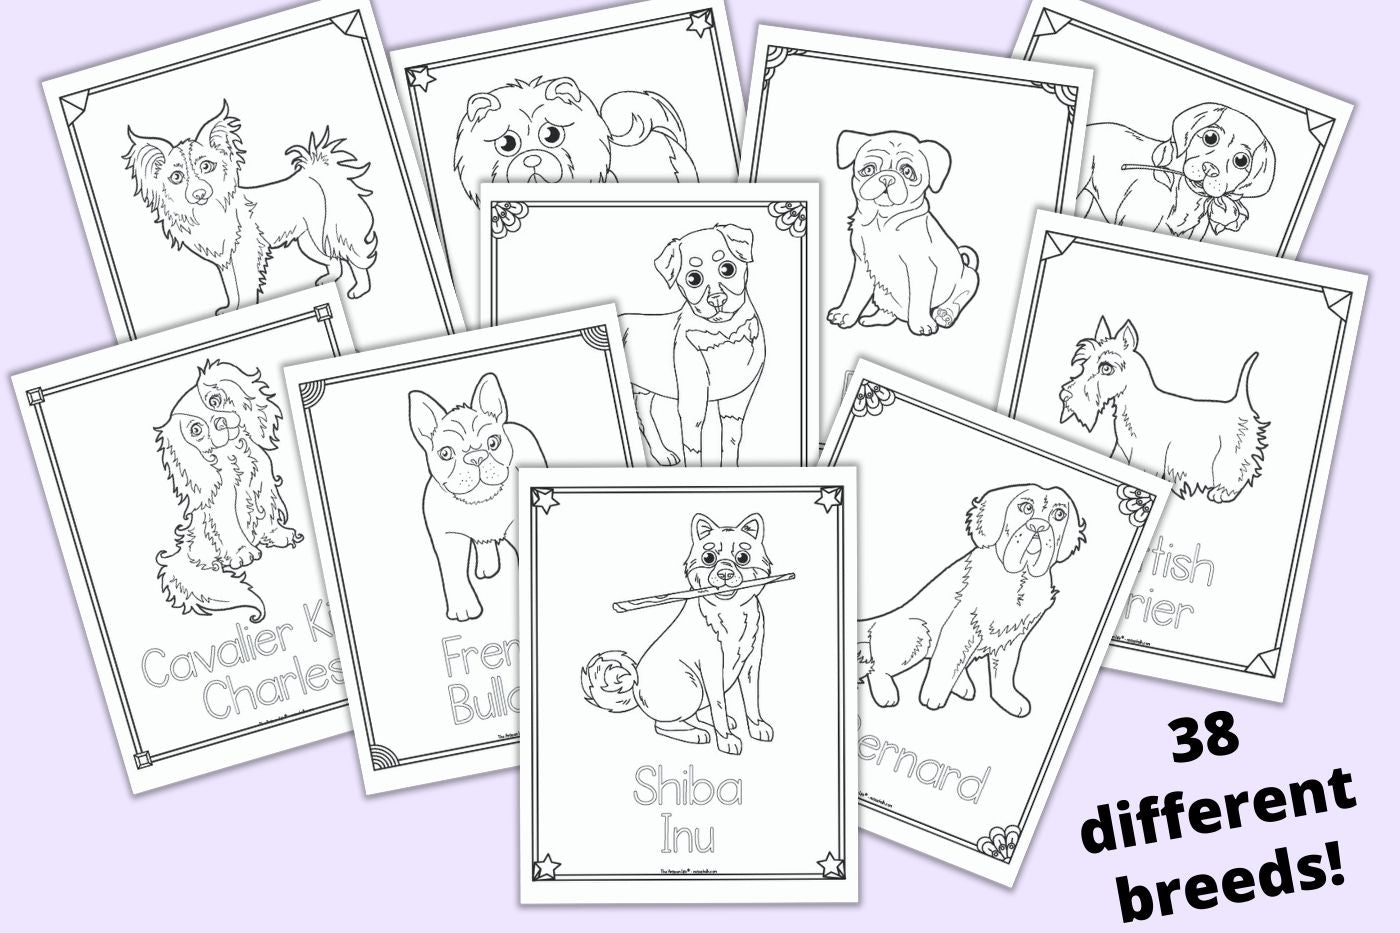 Dog breed coloring pages â the artisan life